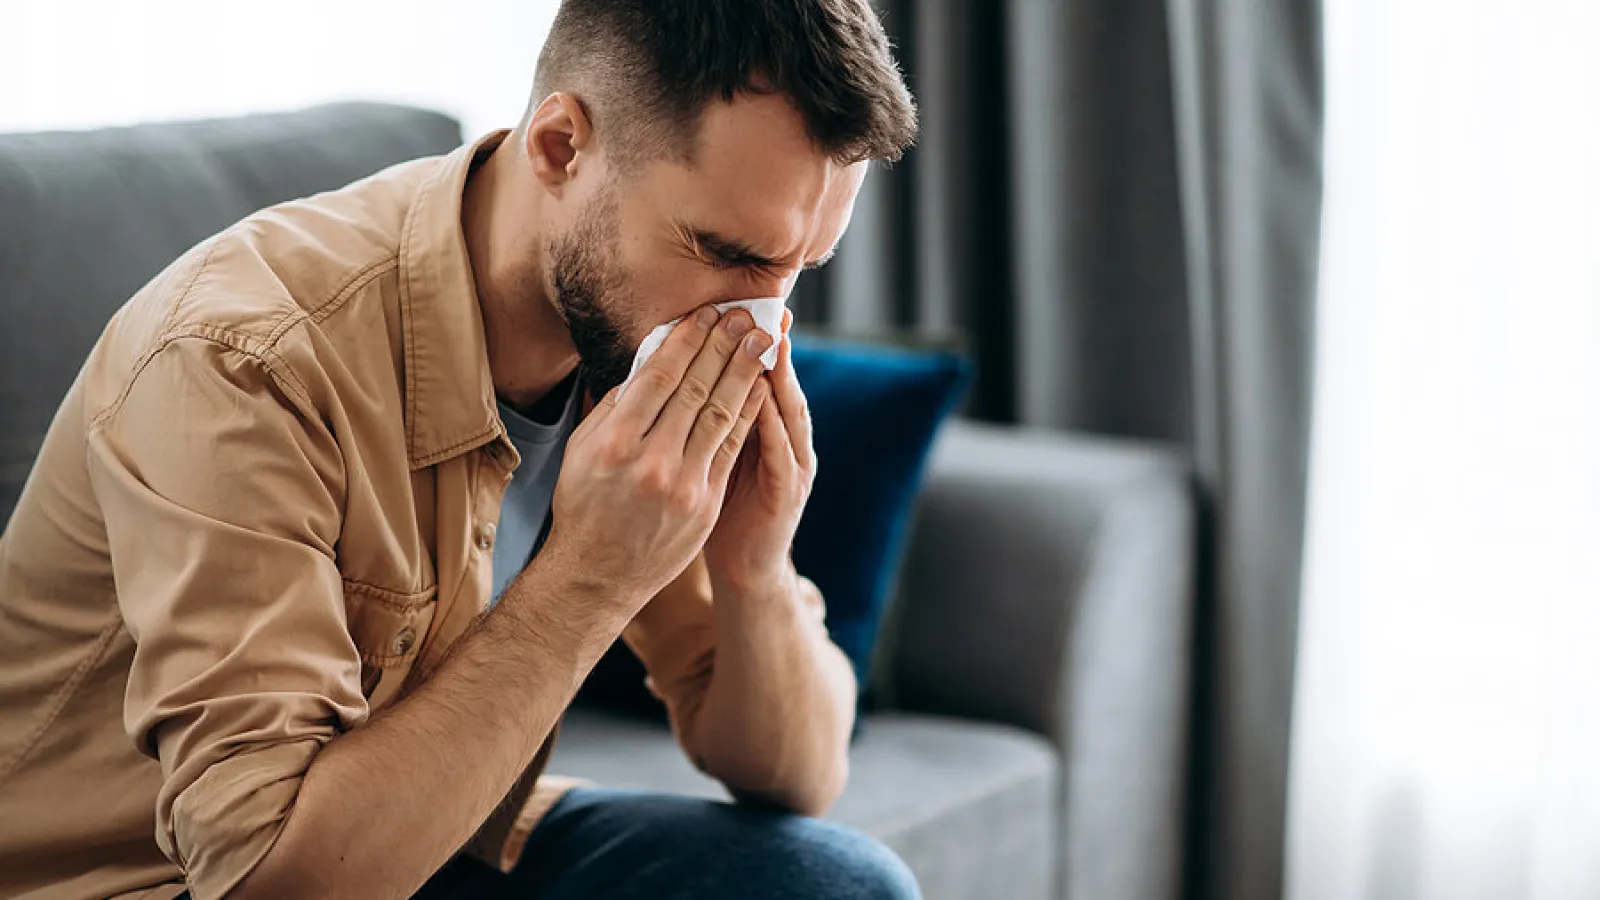 Bridging Relief: Medical Interventions for Chronic Sinus Infections at the Doctor's Office